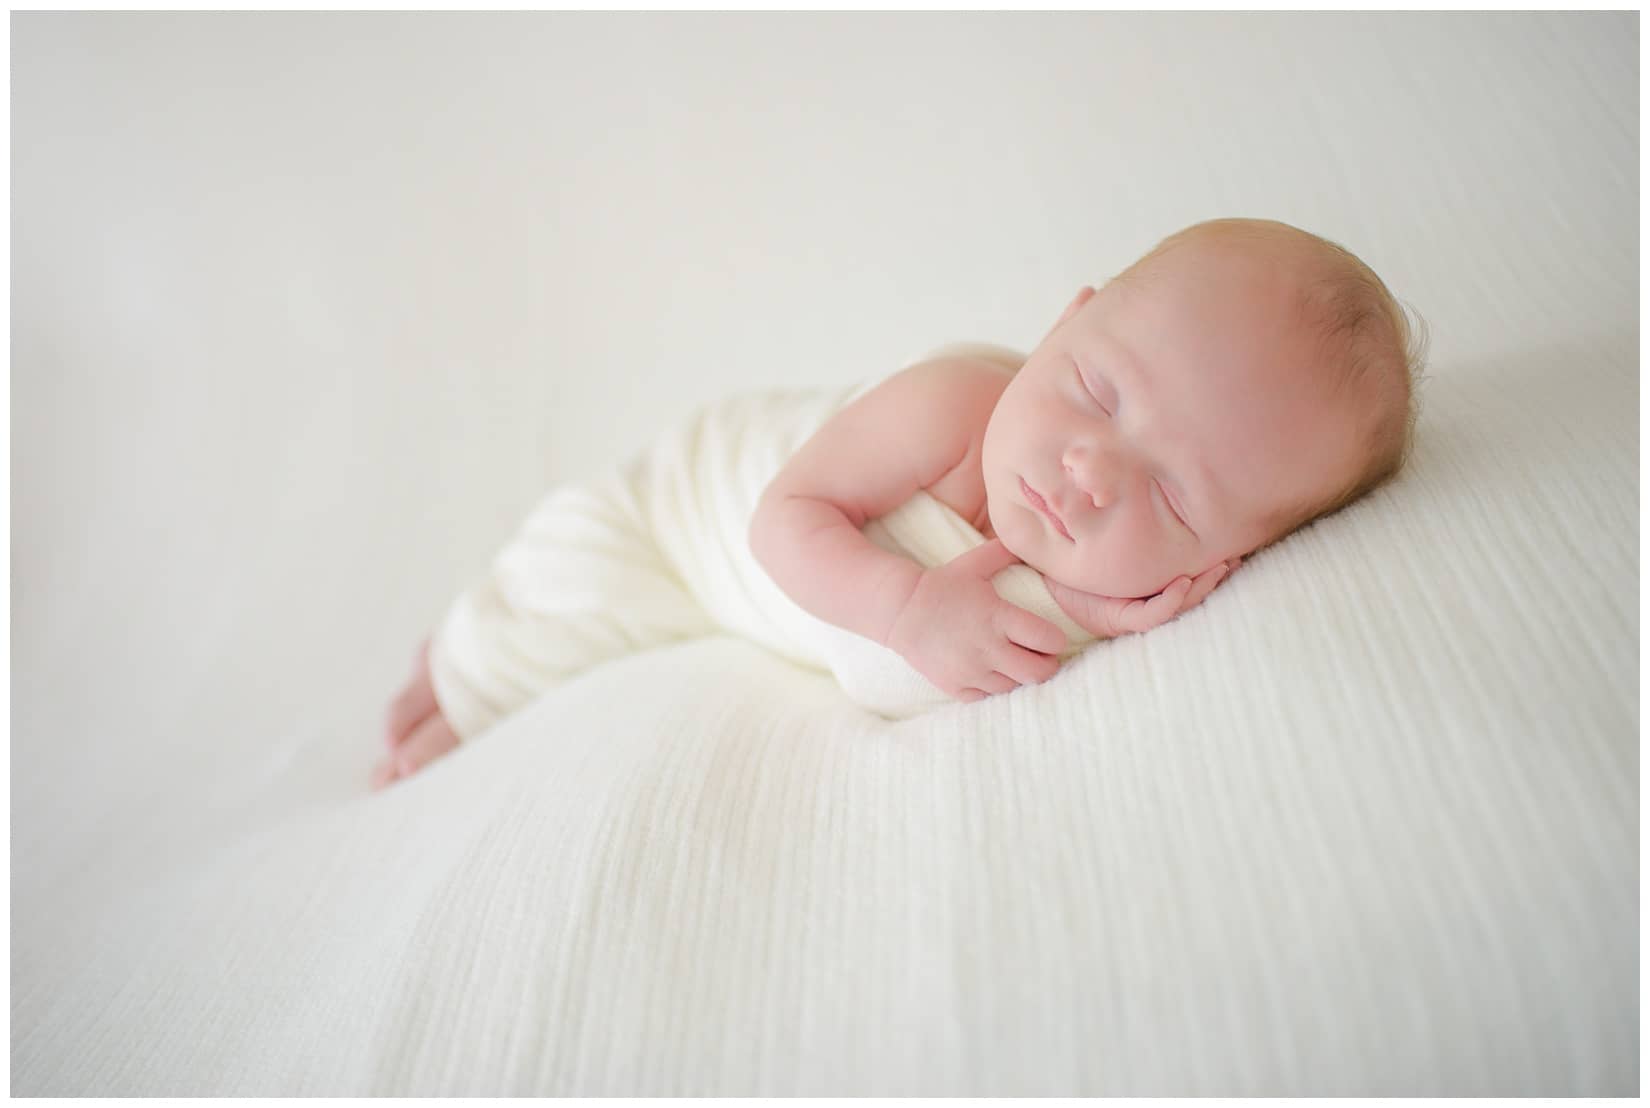 Newborn baby posed in Boise studio. Photos by Tiffany Hix Photography.